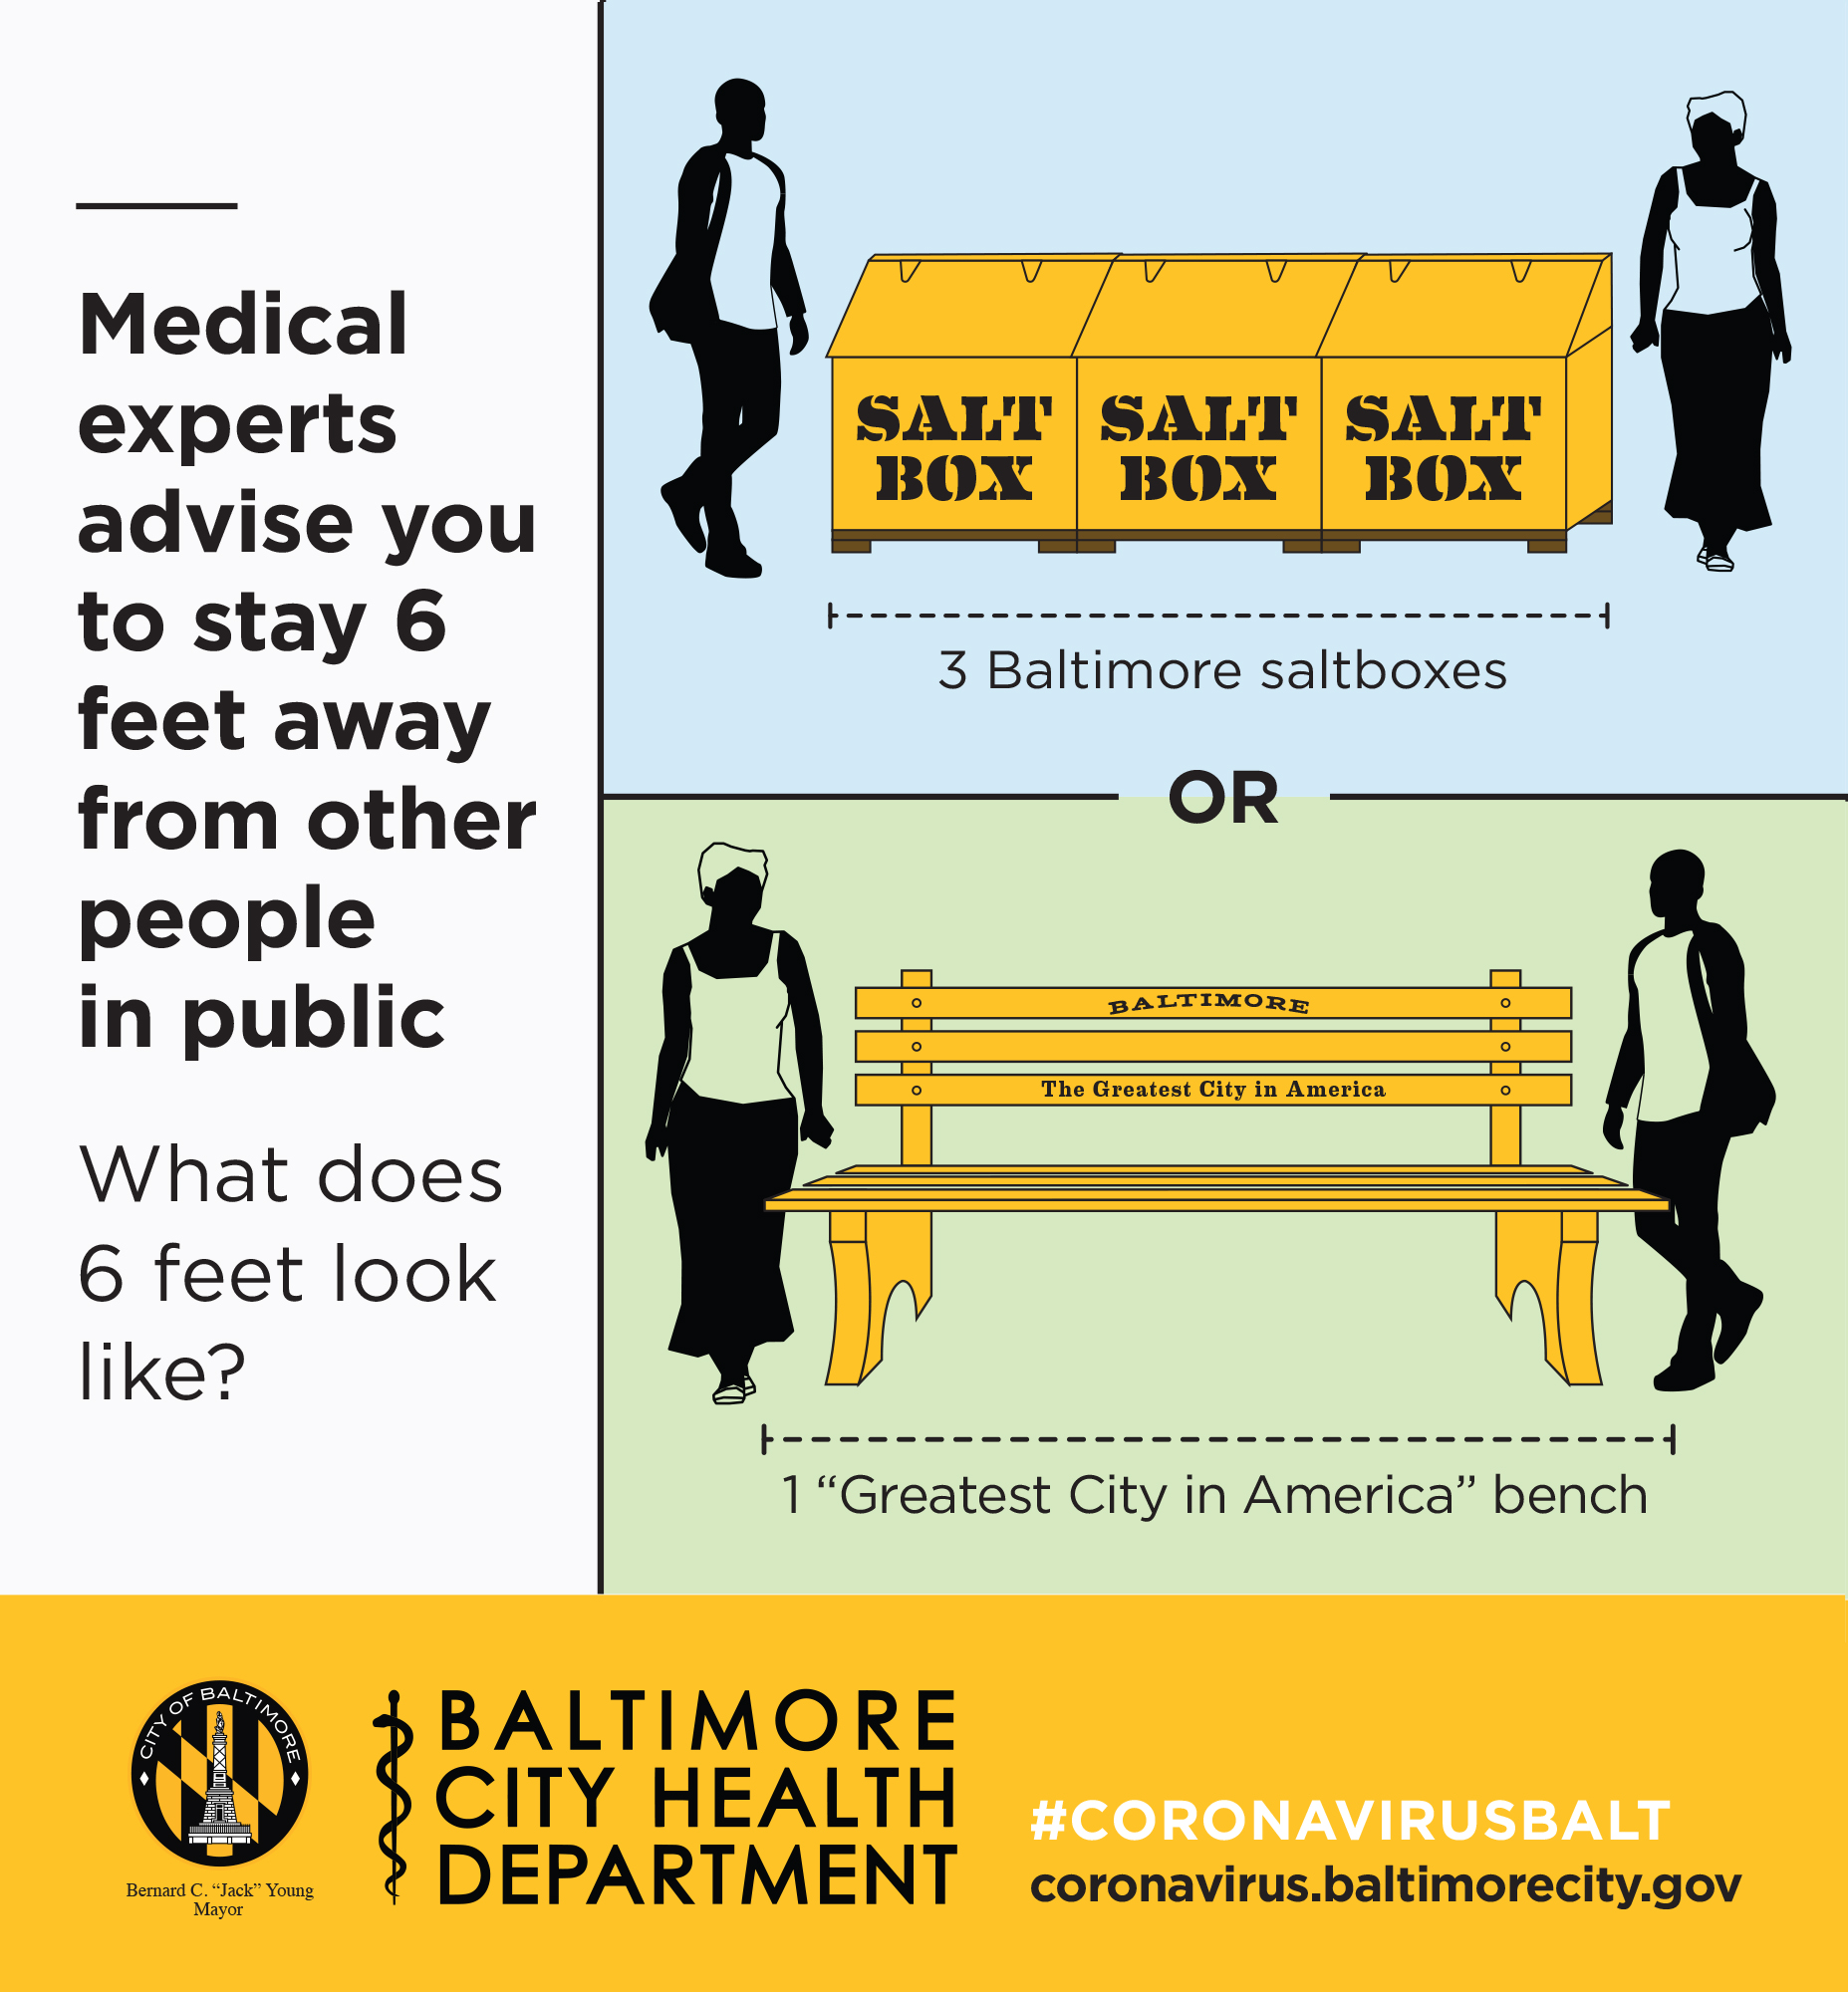 Medical experts advise you to stay 6 feet away from others in public, that's the size of a bench